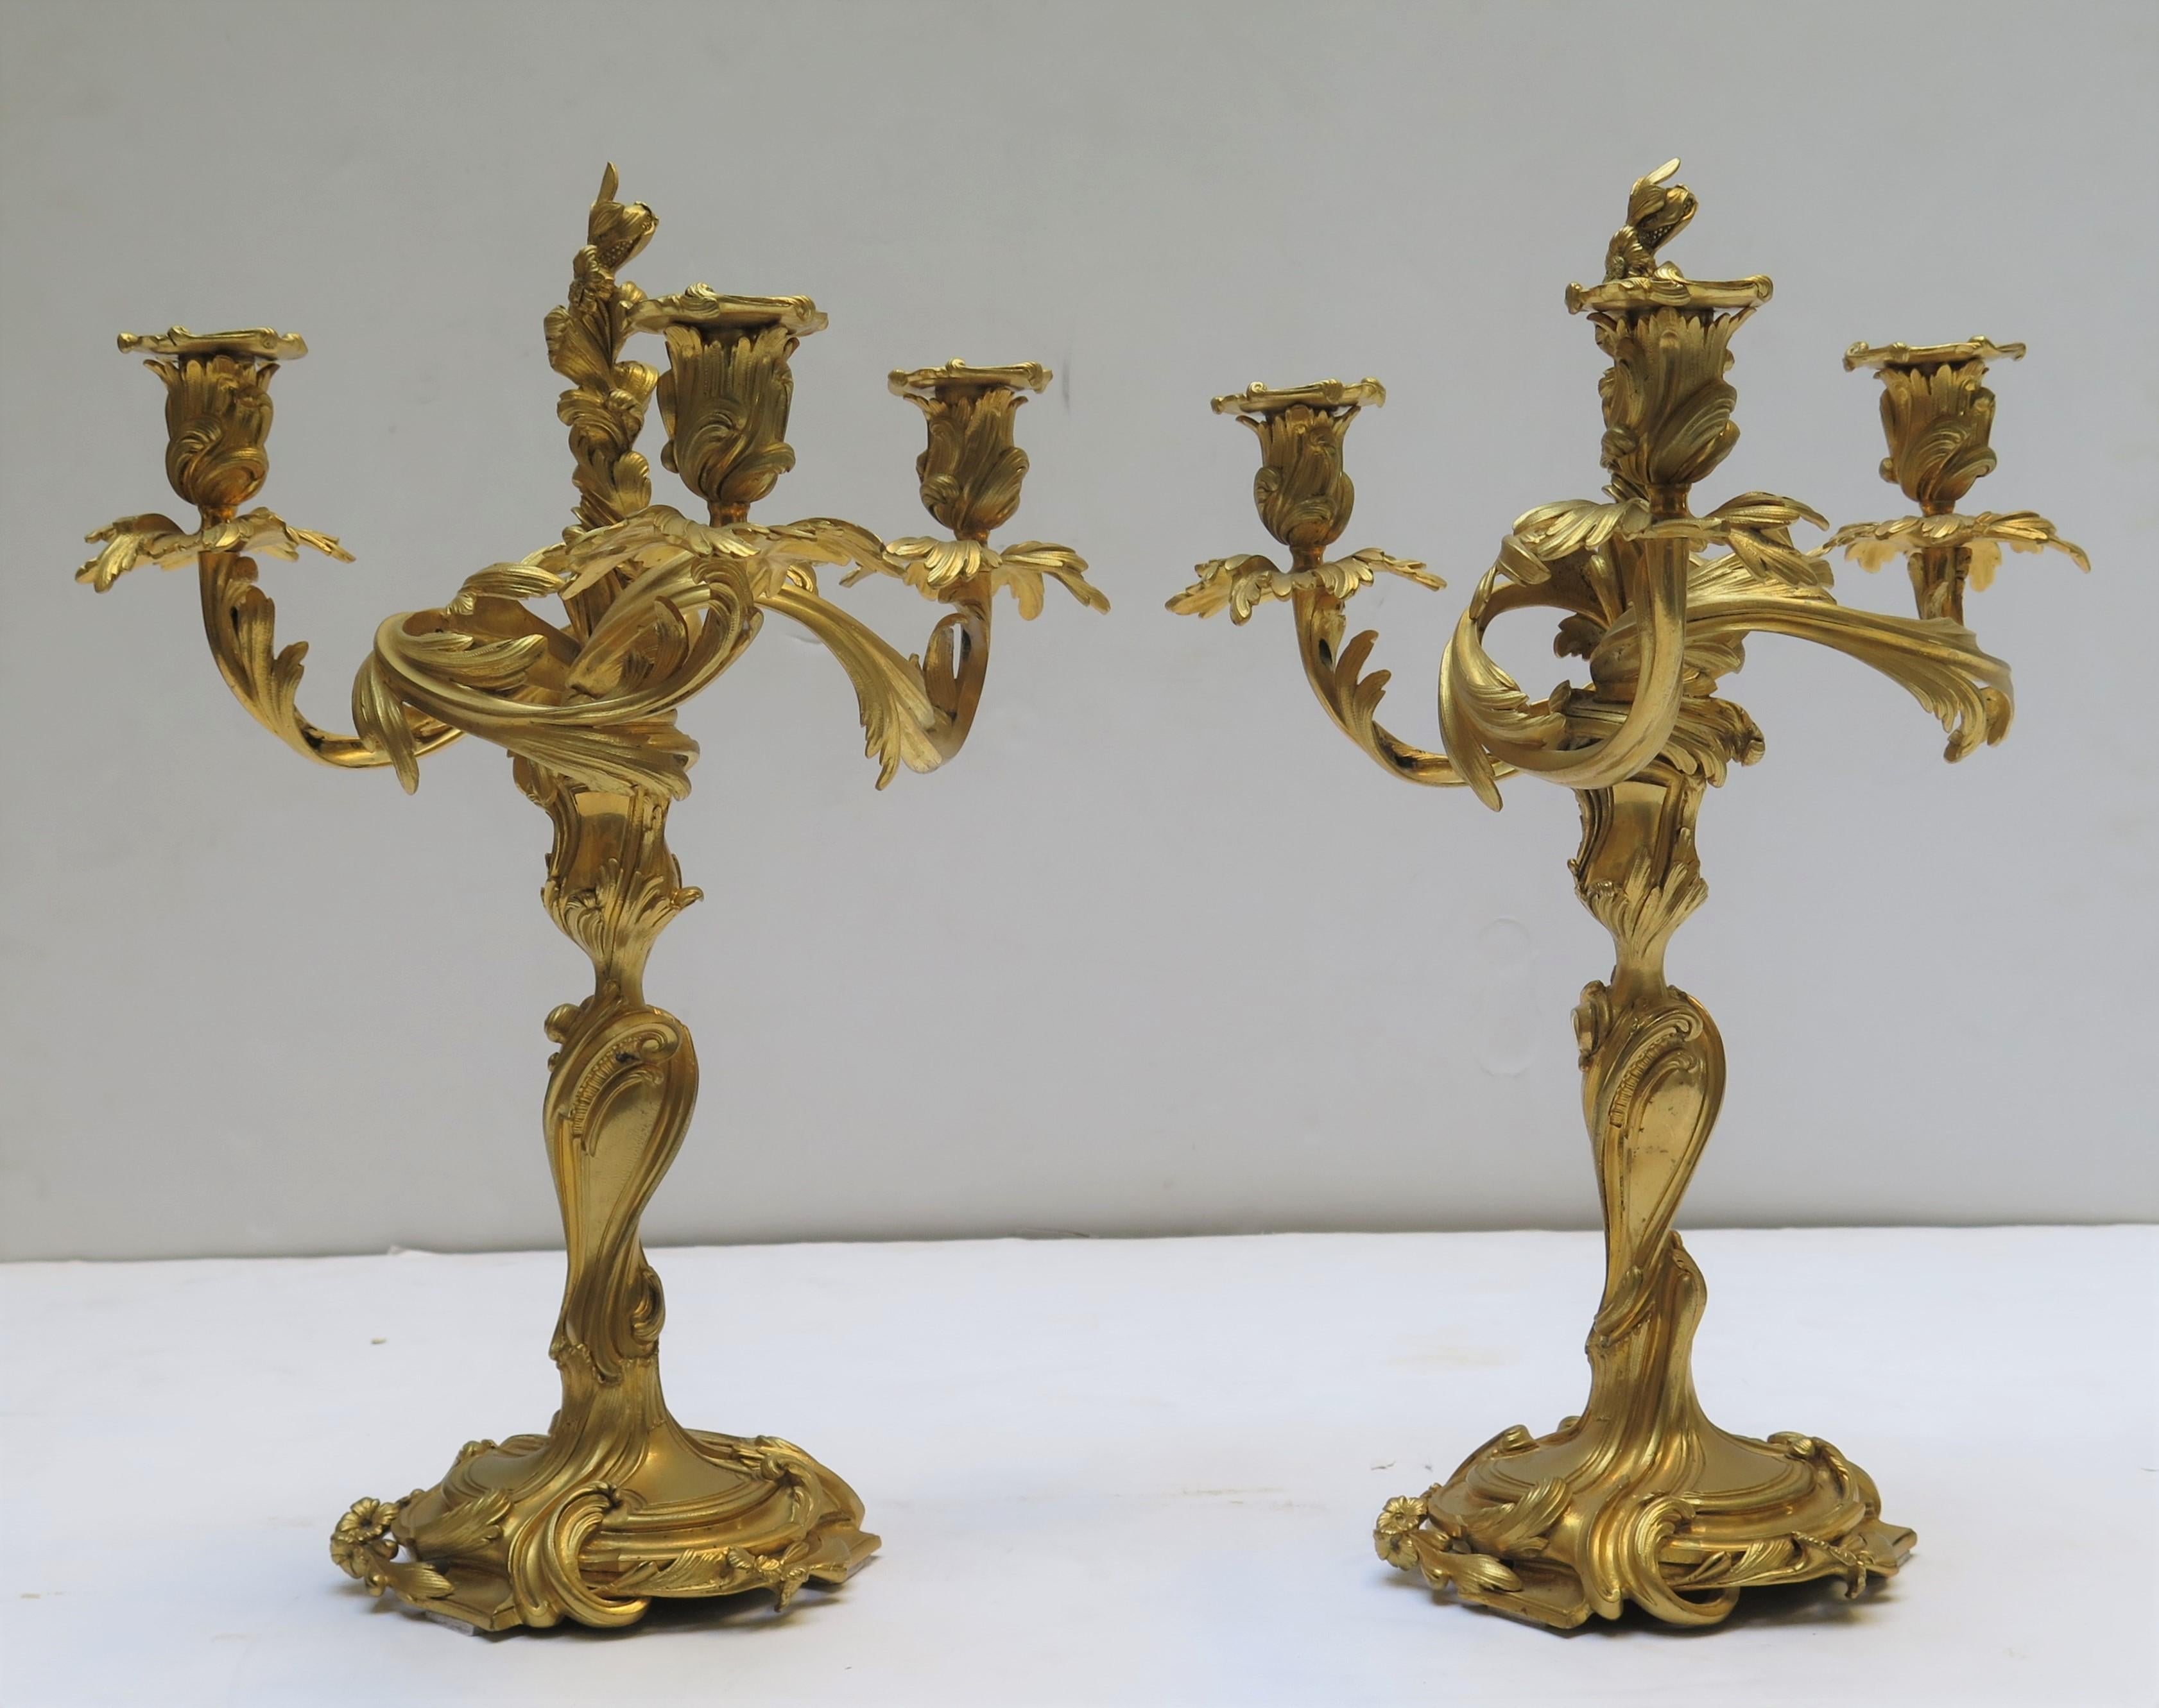 A pair of Louis XV style gilded bronze three-armed antique foliate candelabra of French origin.
Acanthus leaf scrolling arms with leaf bobeches.